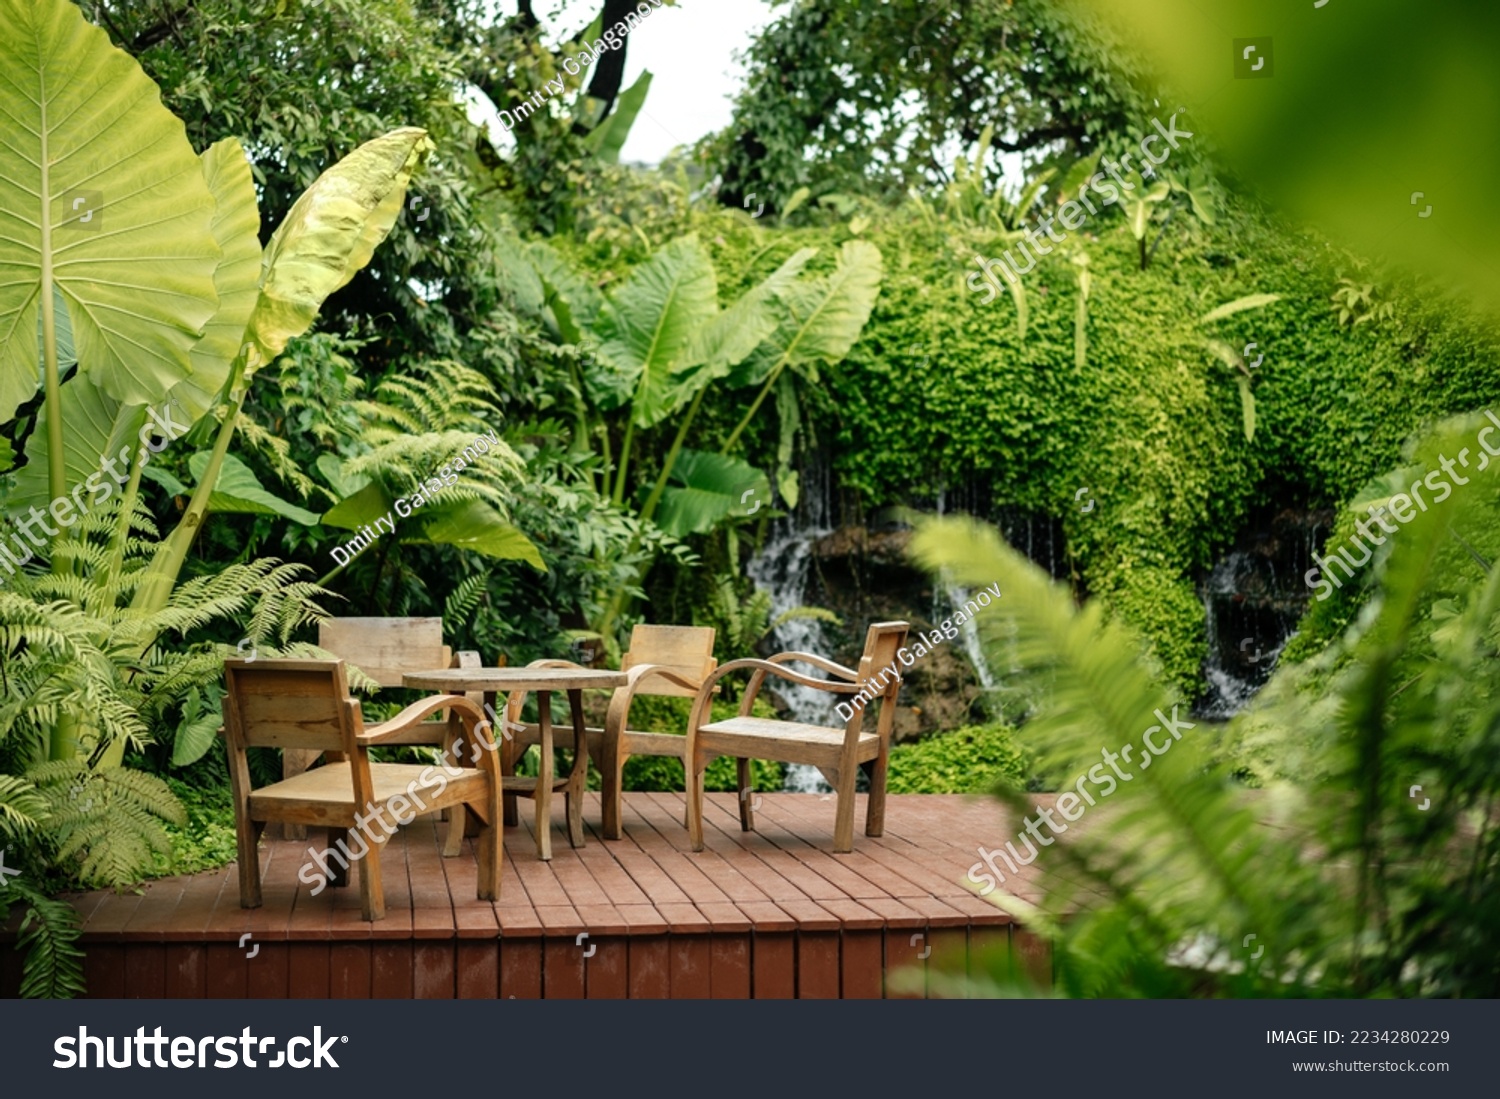 Wooden chairs and tables on the street in the tropics among the foliage. Exterior of cafe or lounge zone. #2234280229